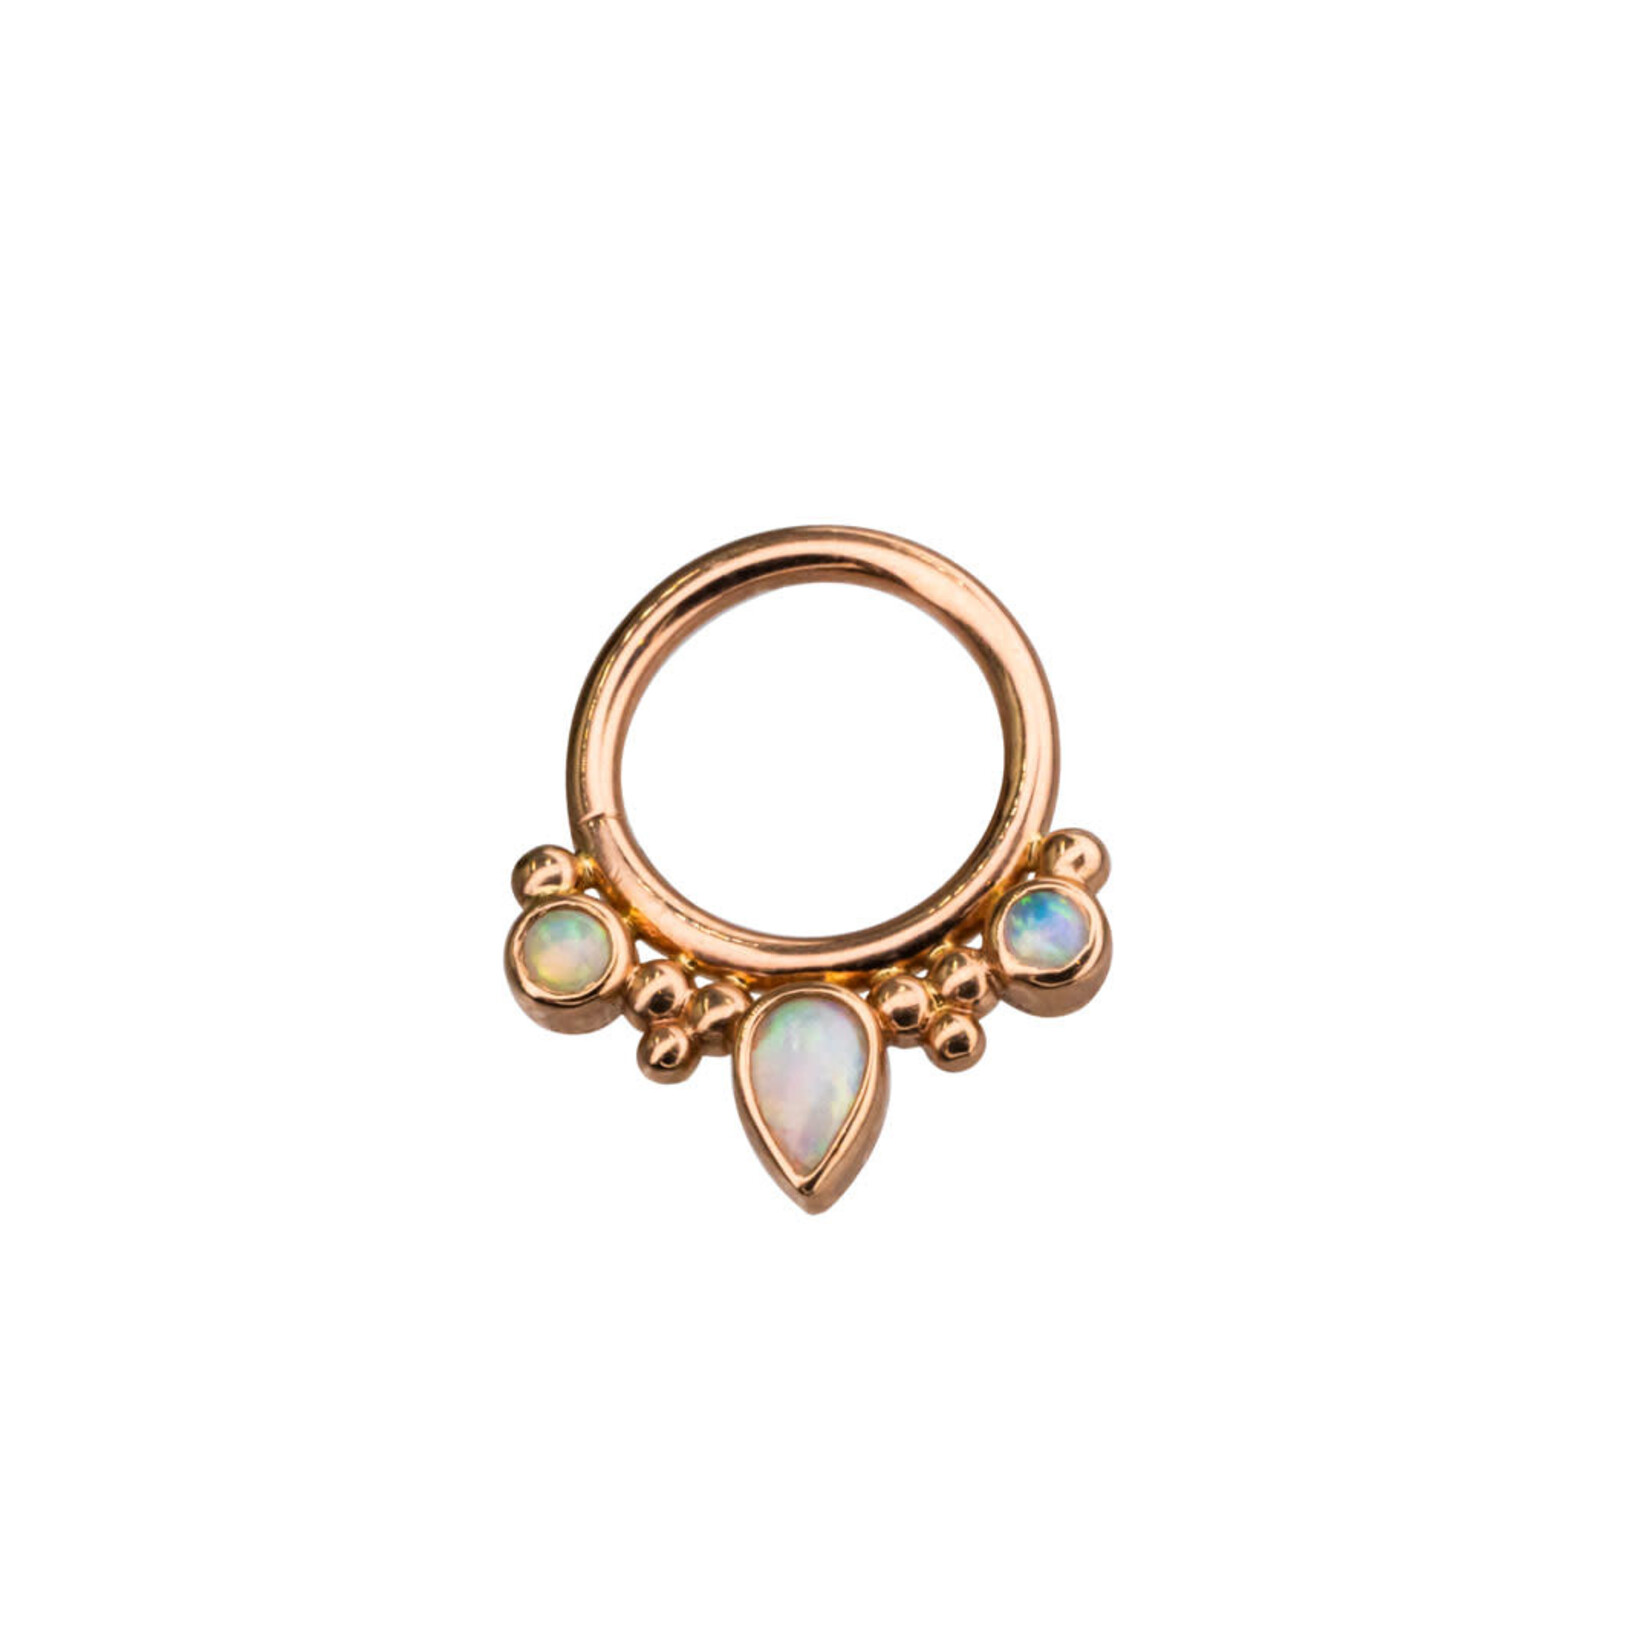 BVLA BVLA 16g "Eden Pear" seam ring with 2x 2.0 AAA white opal and 4x2.5 AAA white opal pear